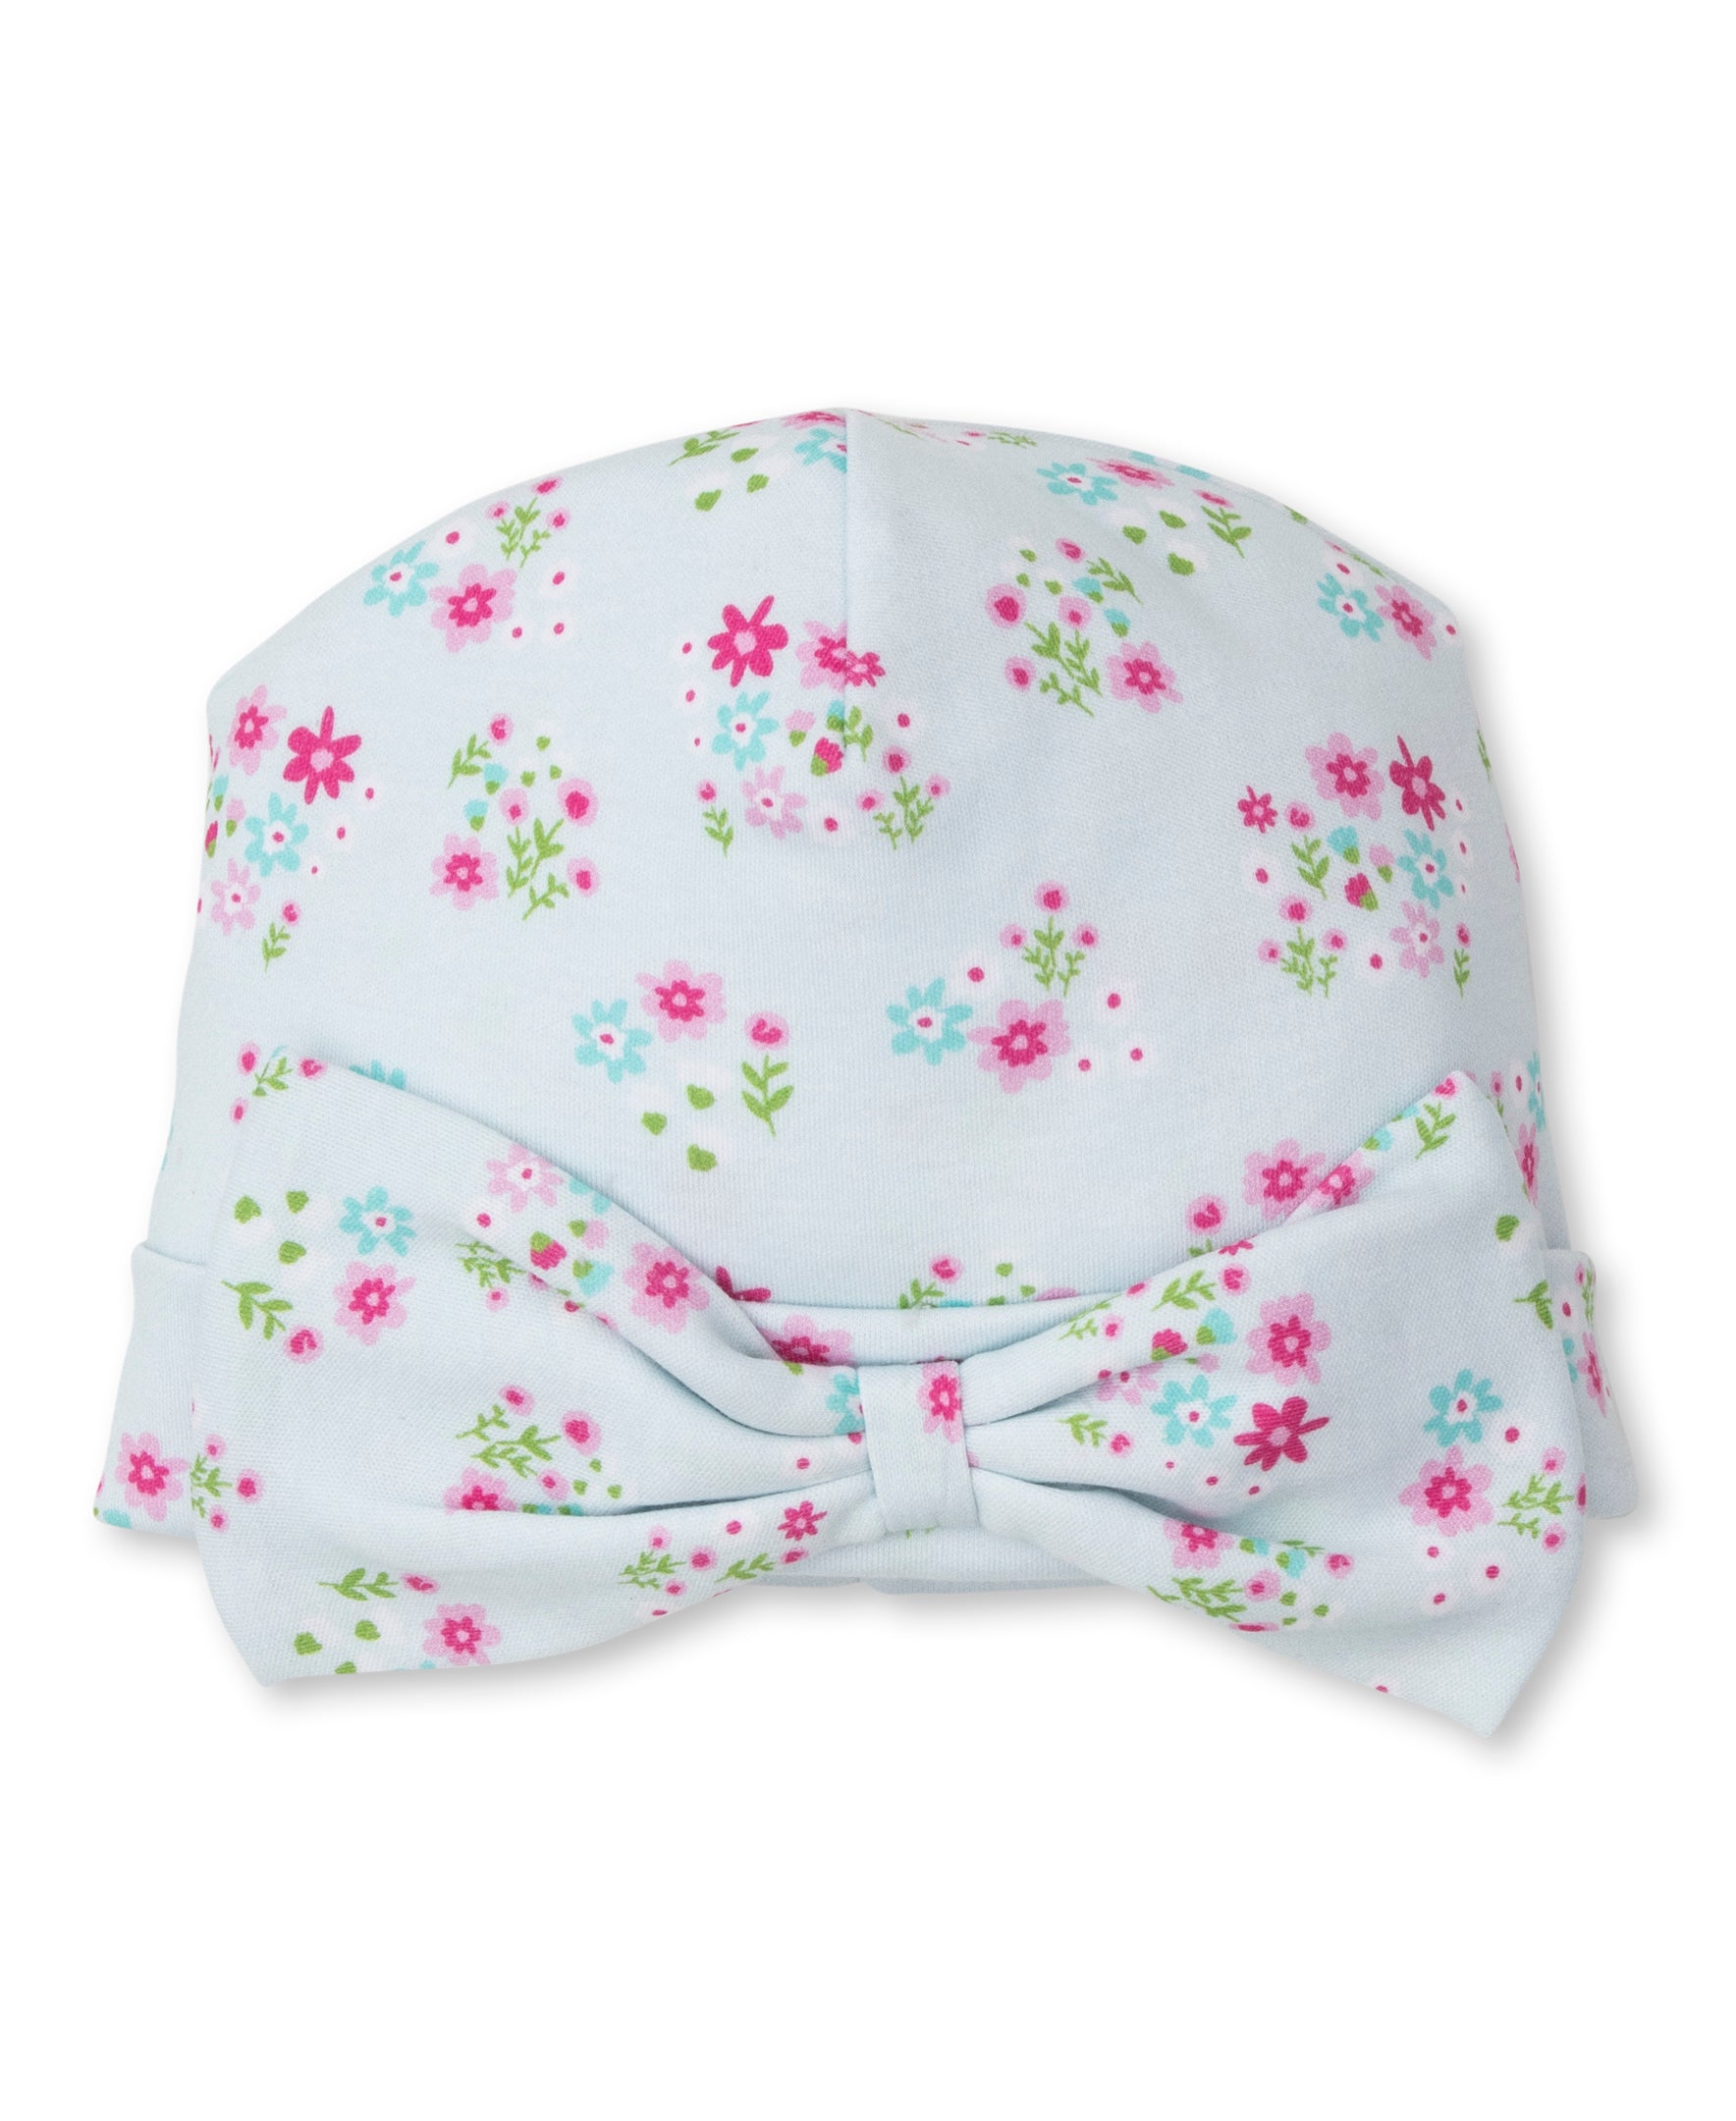 Bunny Blossoms Floral Novelty Hat - Kissy Kissy